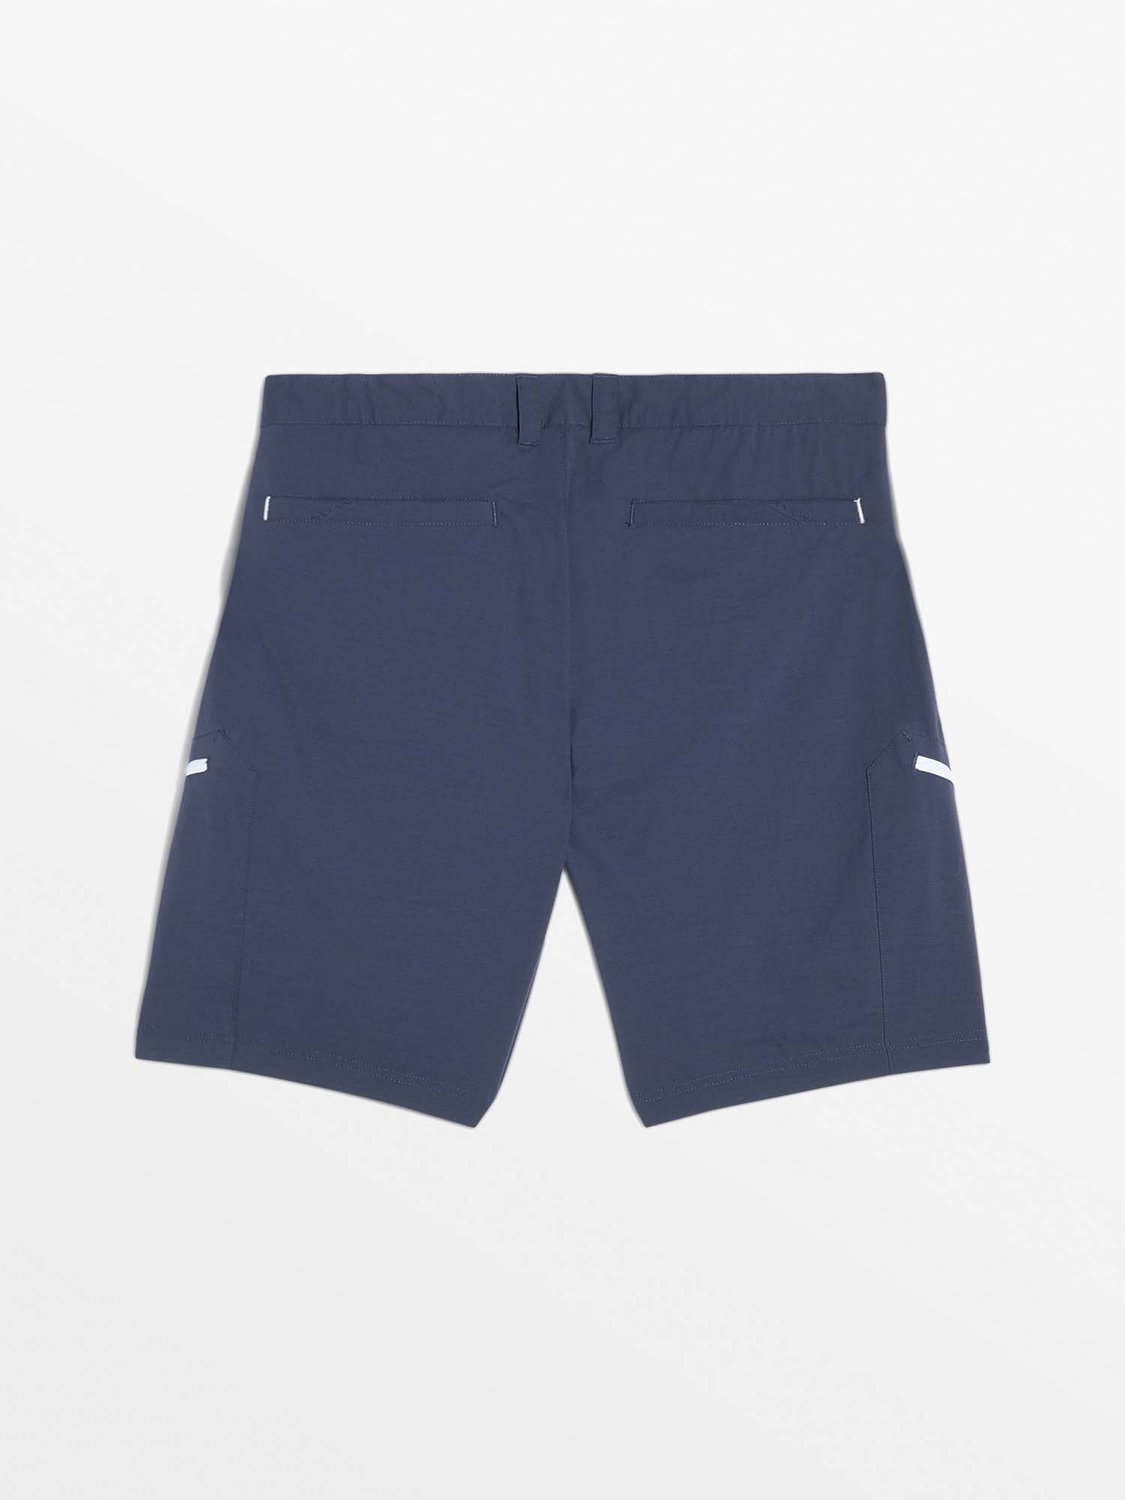 Short Homme Stretch Taille Ajustable Marine